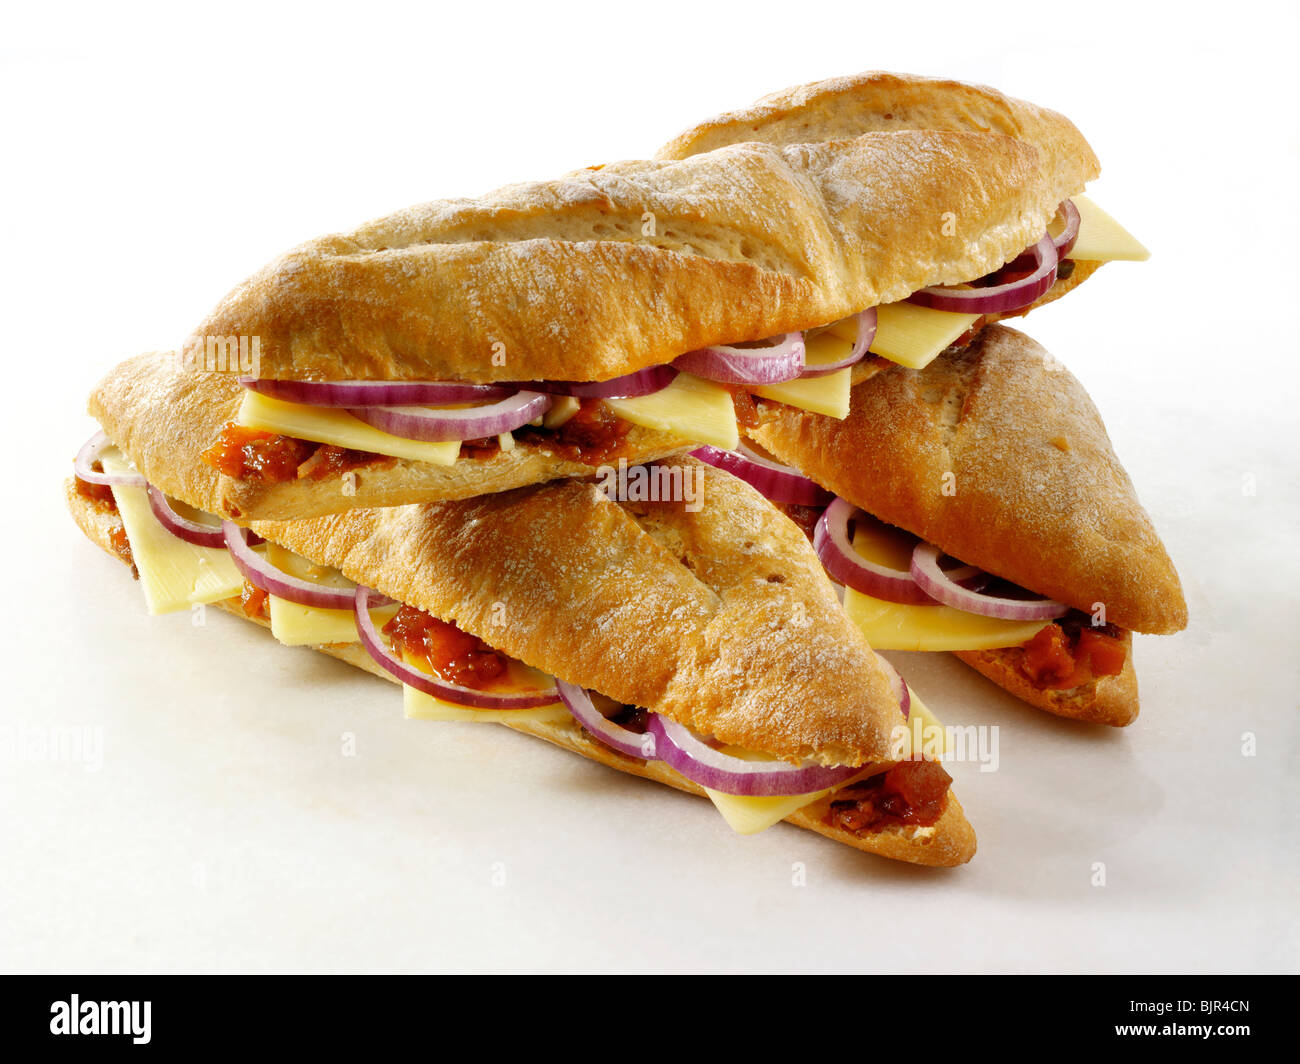 Ploughman's baguette, Cheddar cheese, red onion and pickle. Food photos. Stock Photo